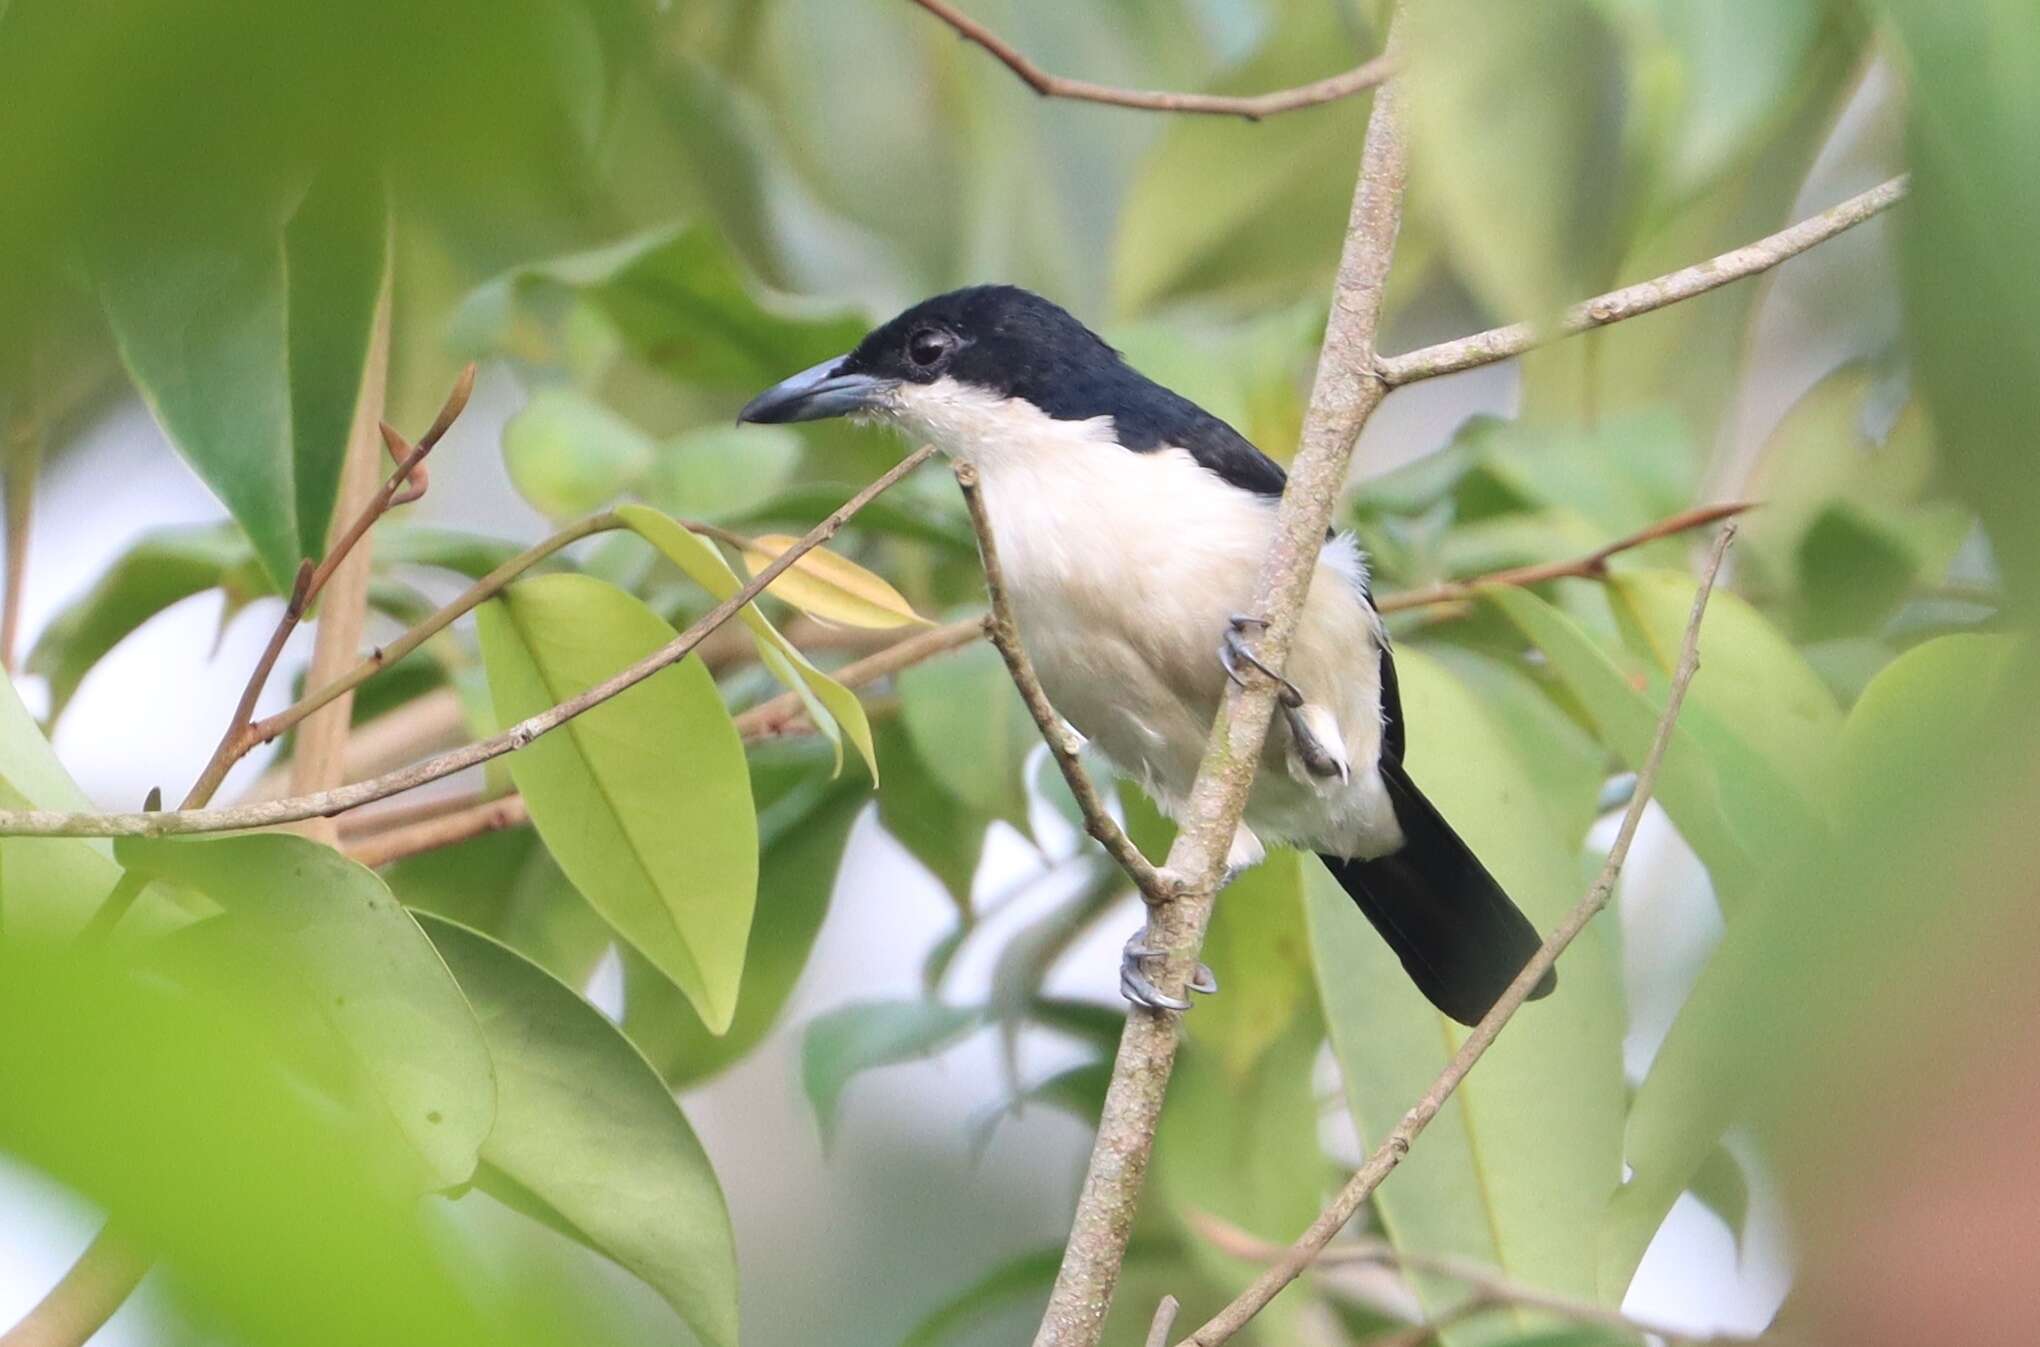 Image of Large-billed Puffback